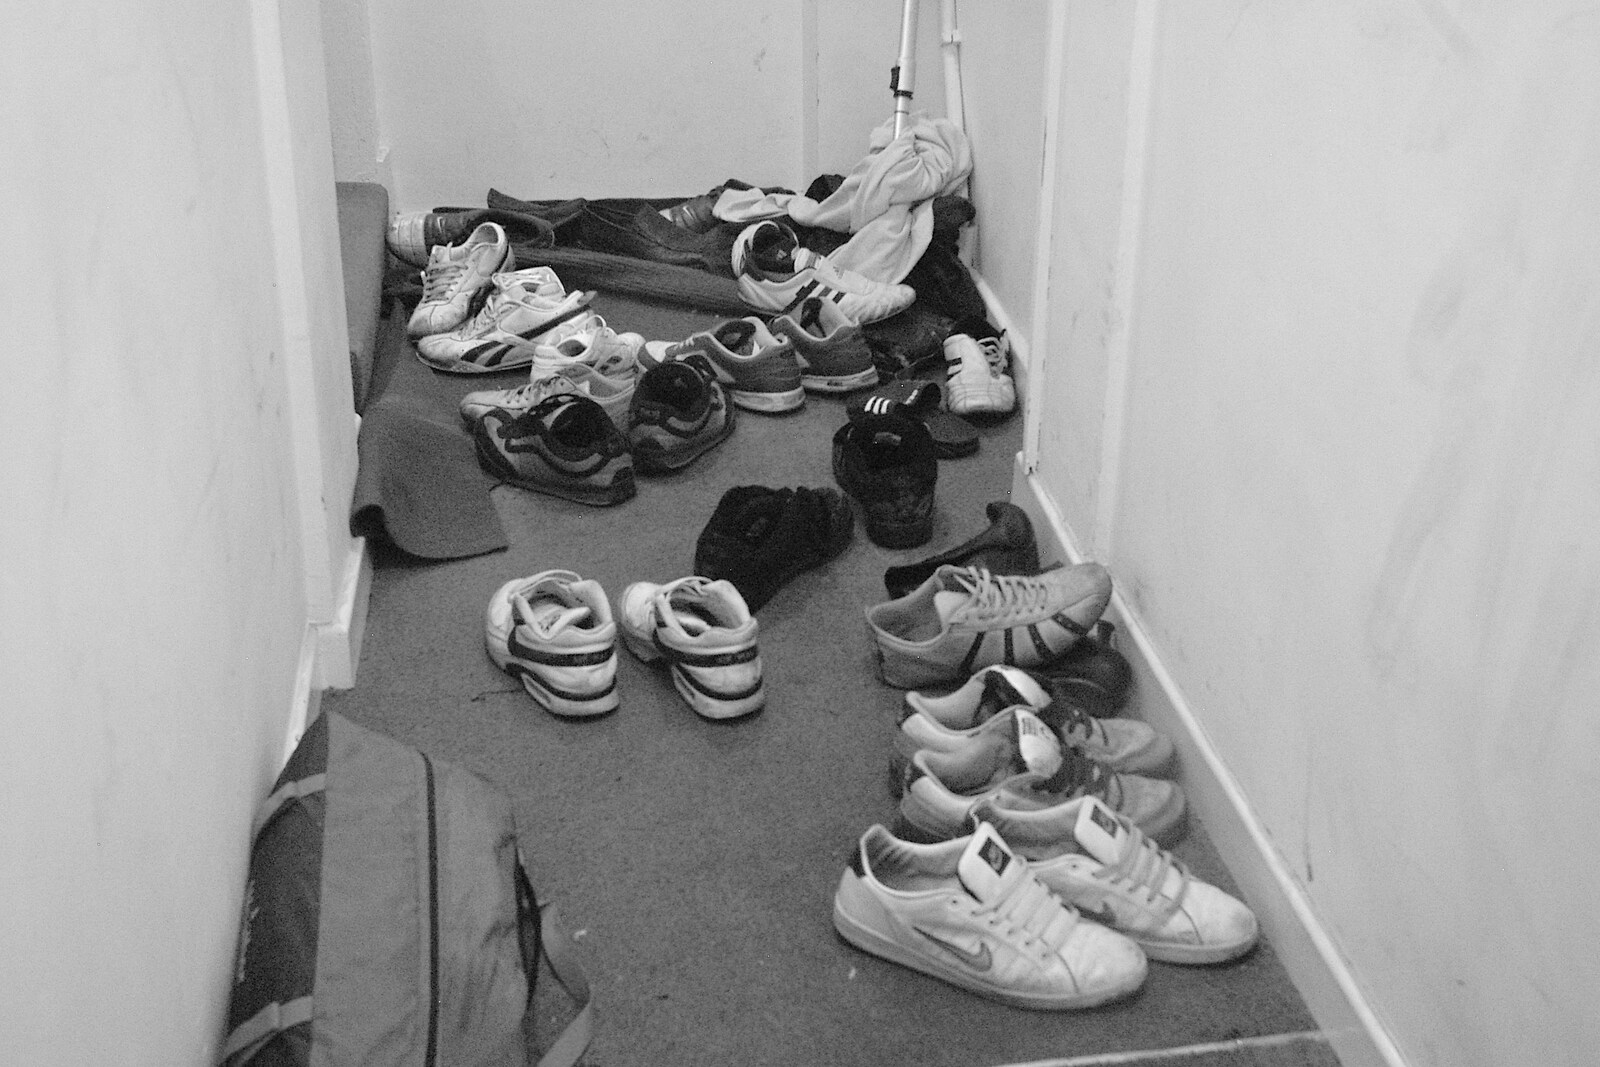 There are a lot of trainers in someone's hallway from Pre-Christmas Roundup: Wigs, Beers and Kebabs, Diss, Norfolk - 24th December 2005